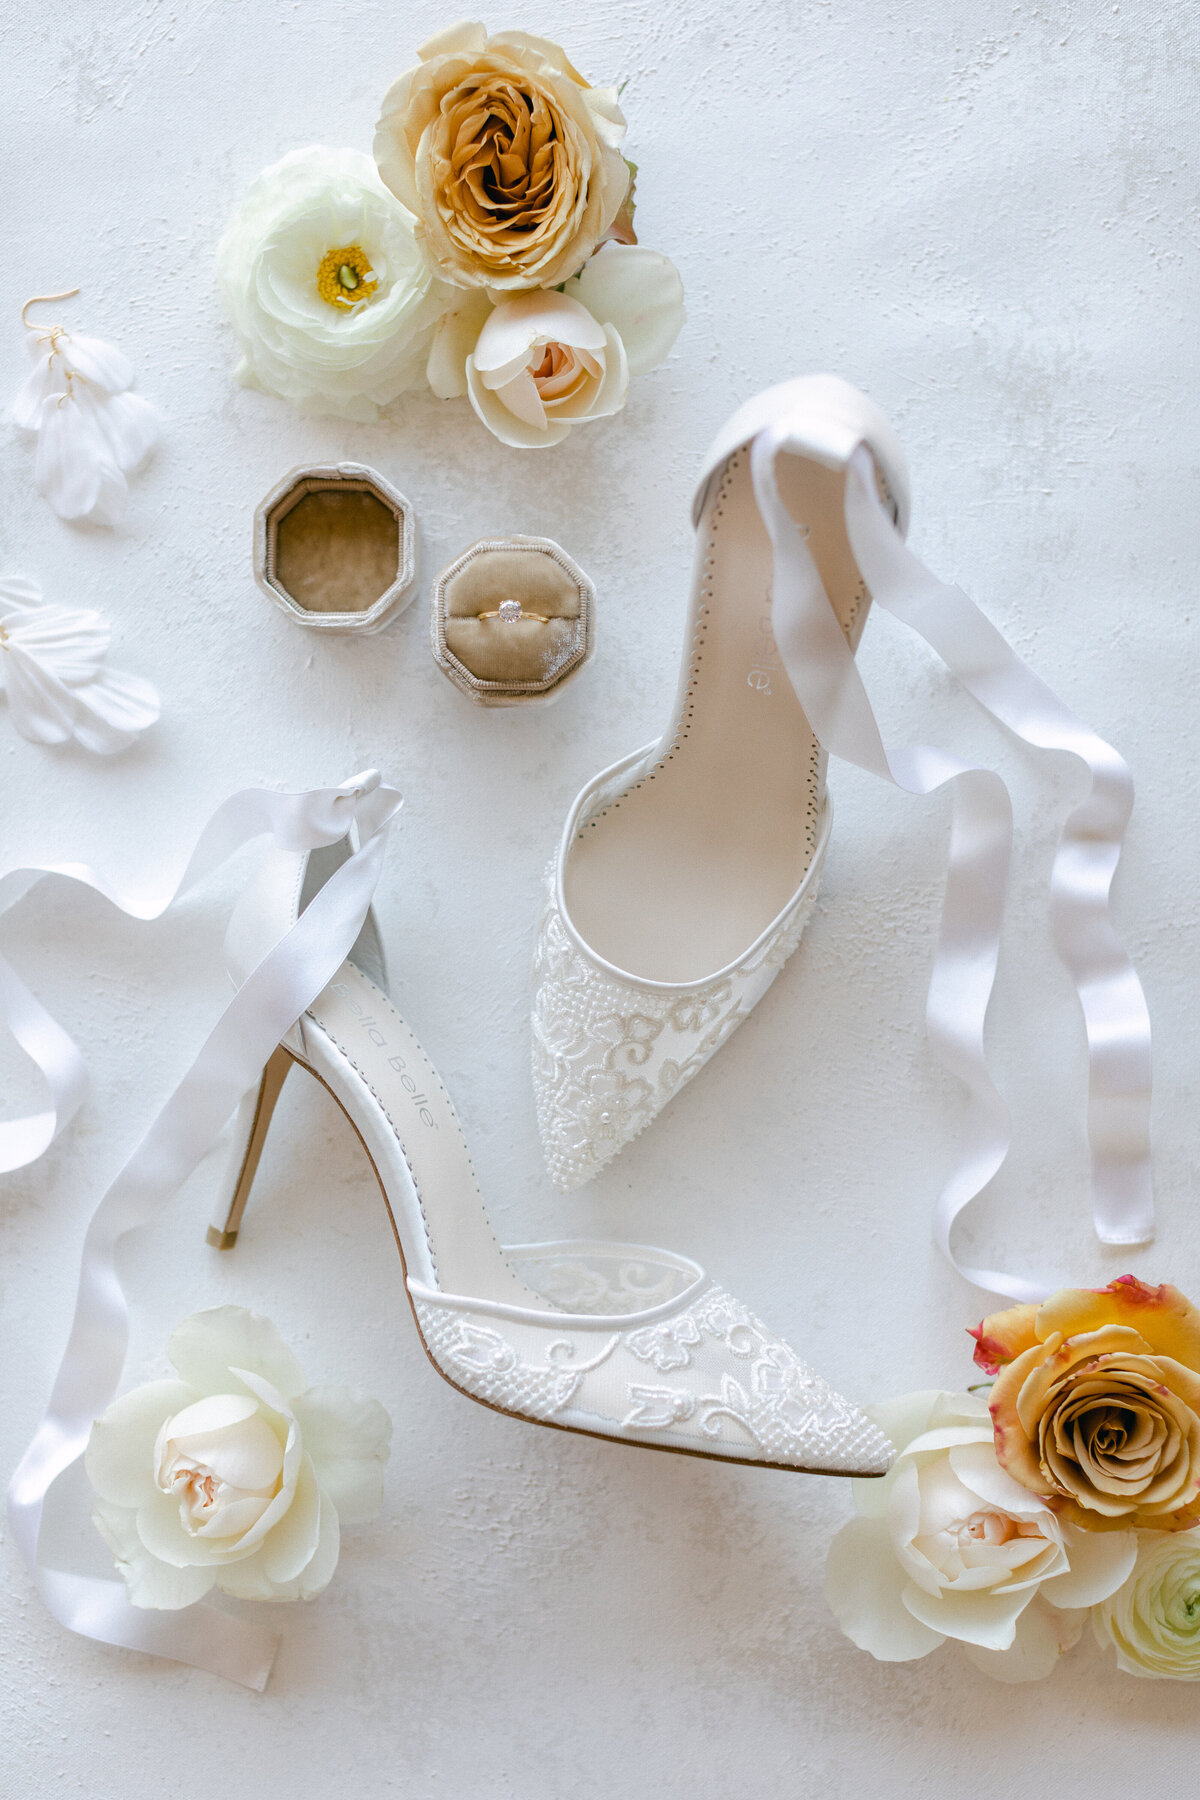 Flatlay of wedding day details - lace heels and wedding rings